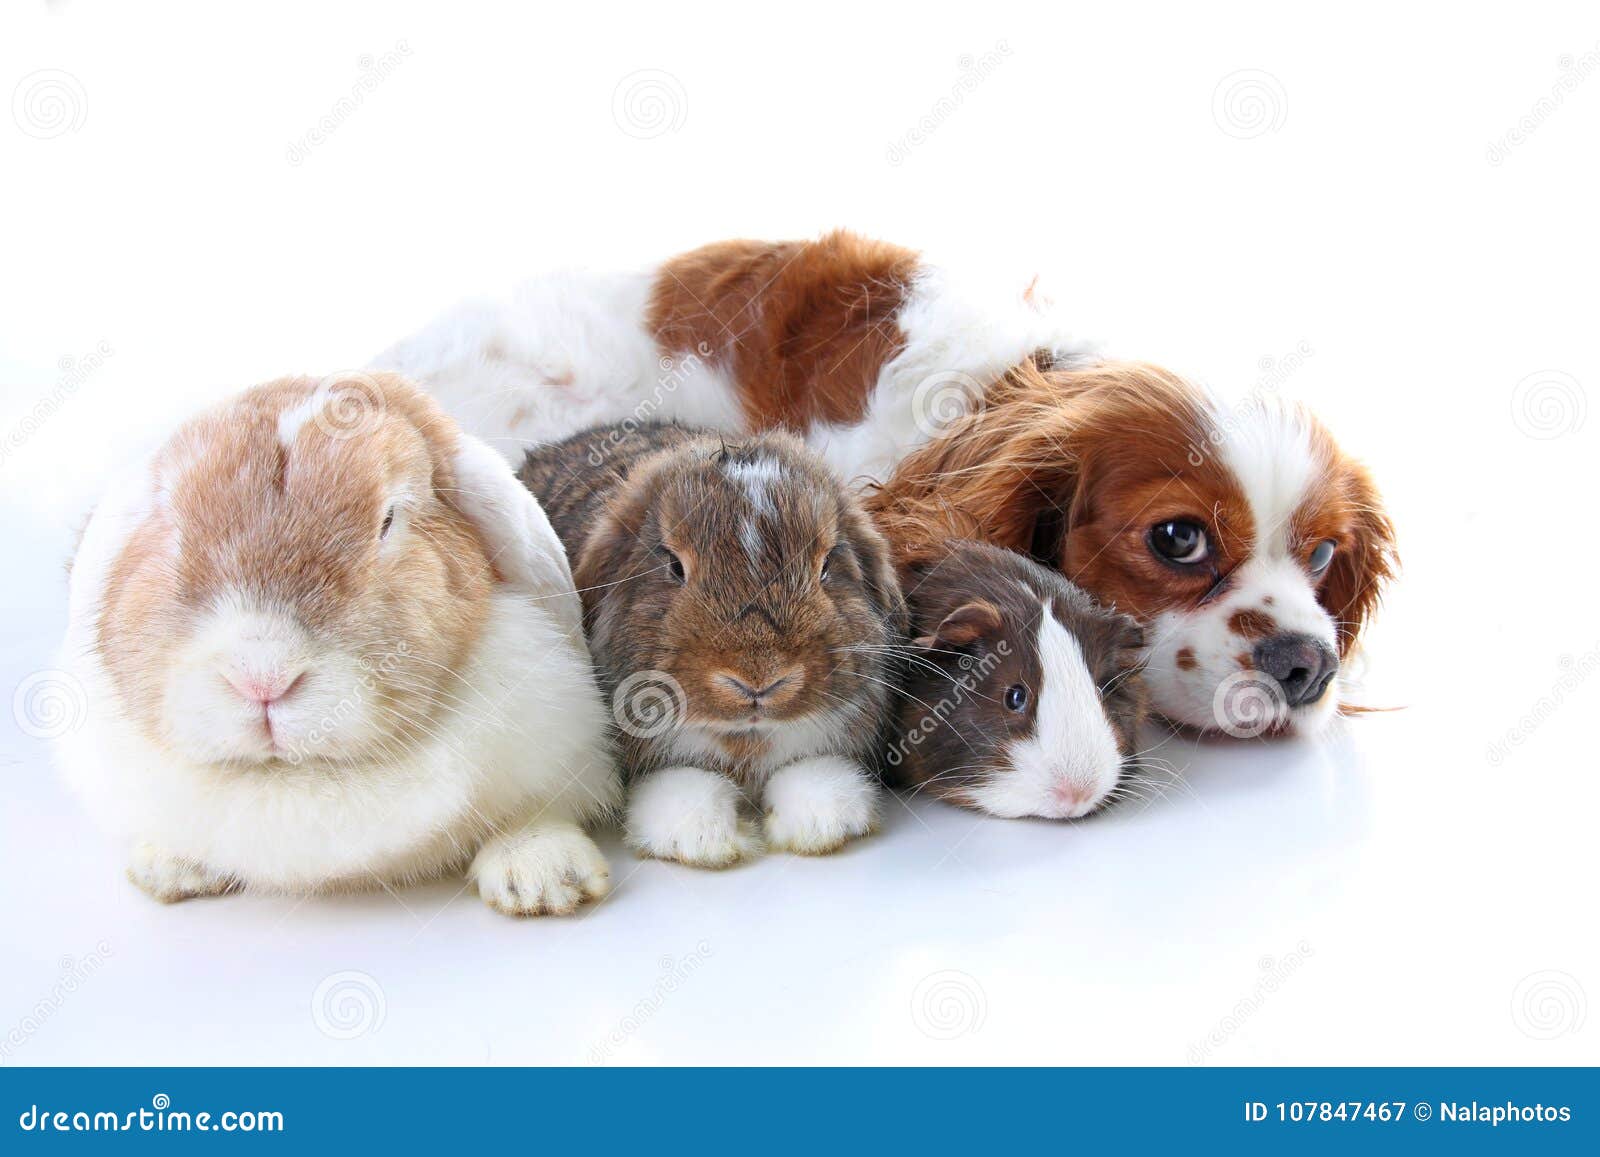 Animals Together. Real Pet Friends. Rabbit Dog Guinea Pig Animal  Friendship. Pets Loves Each Other Stock Image - Image of real, cover:  107847467